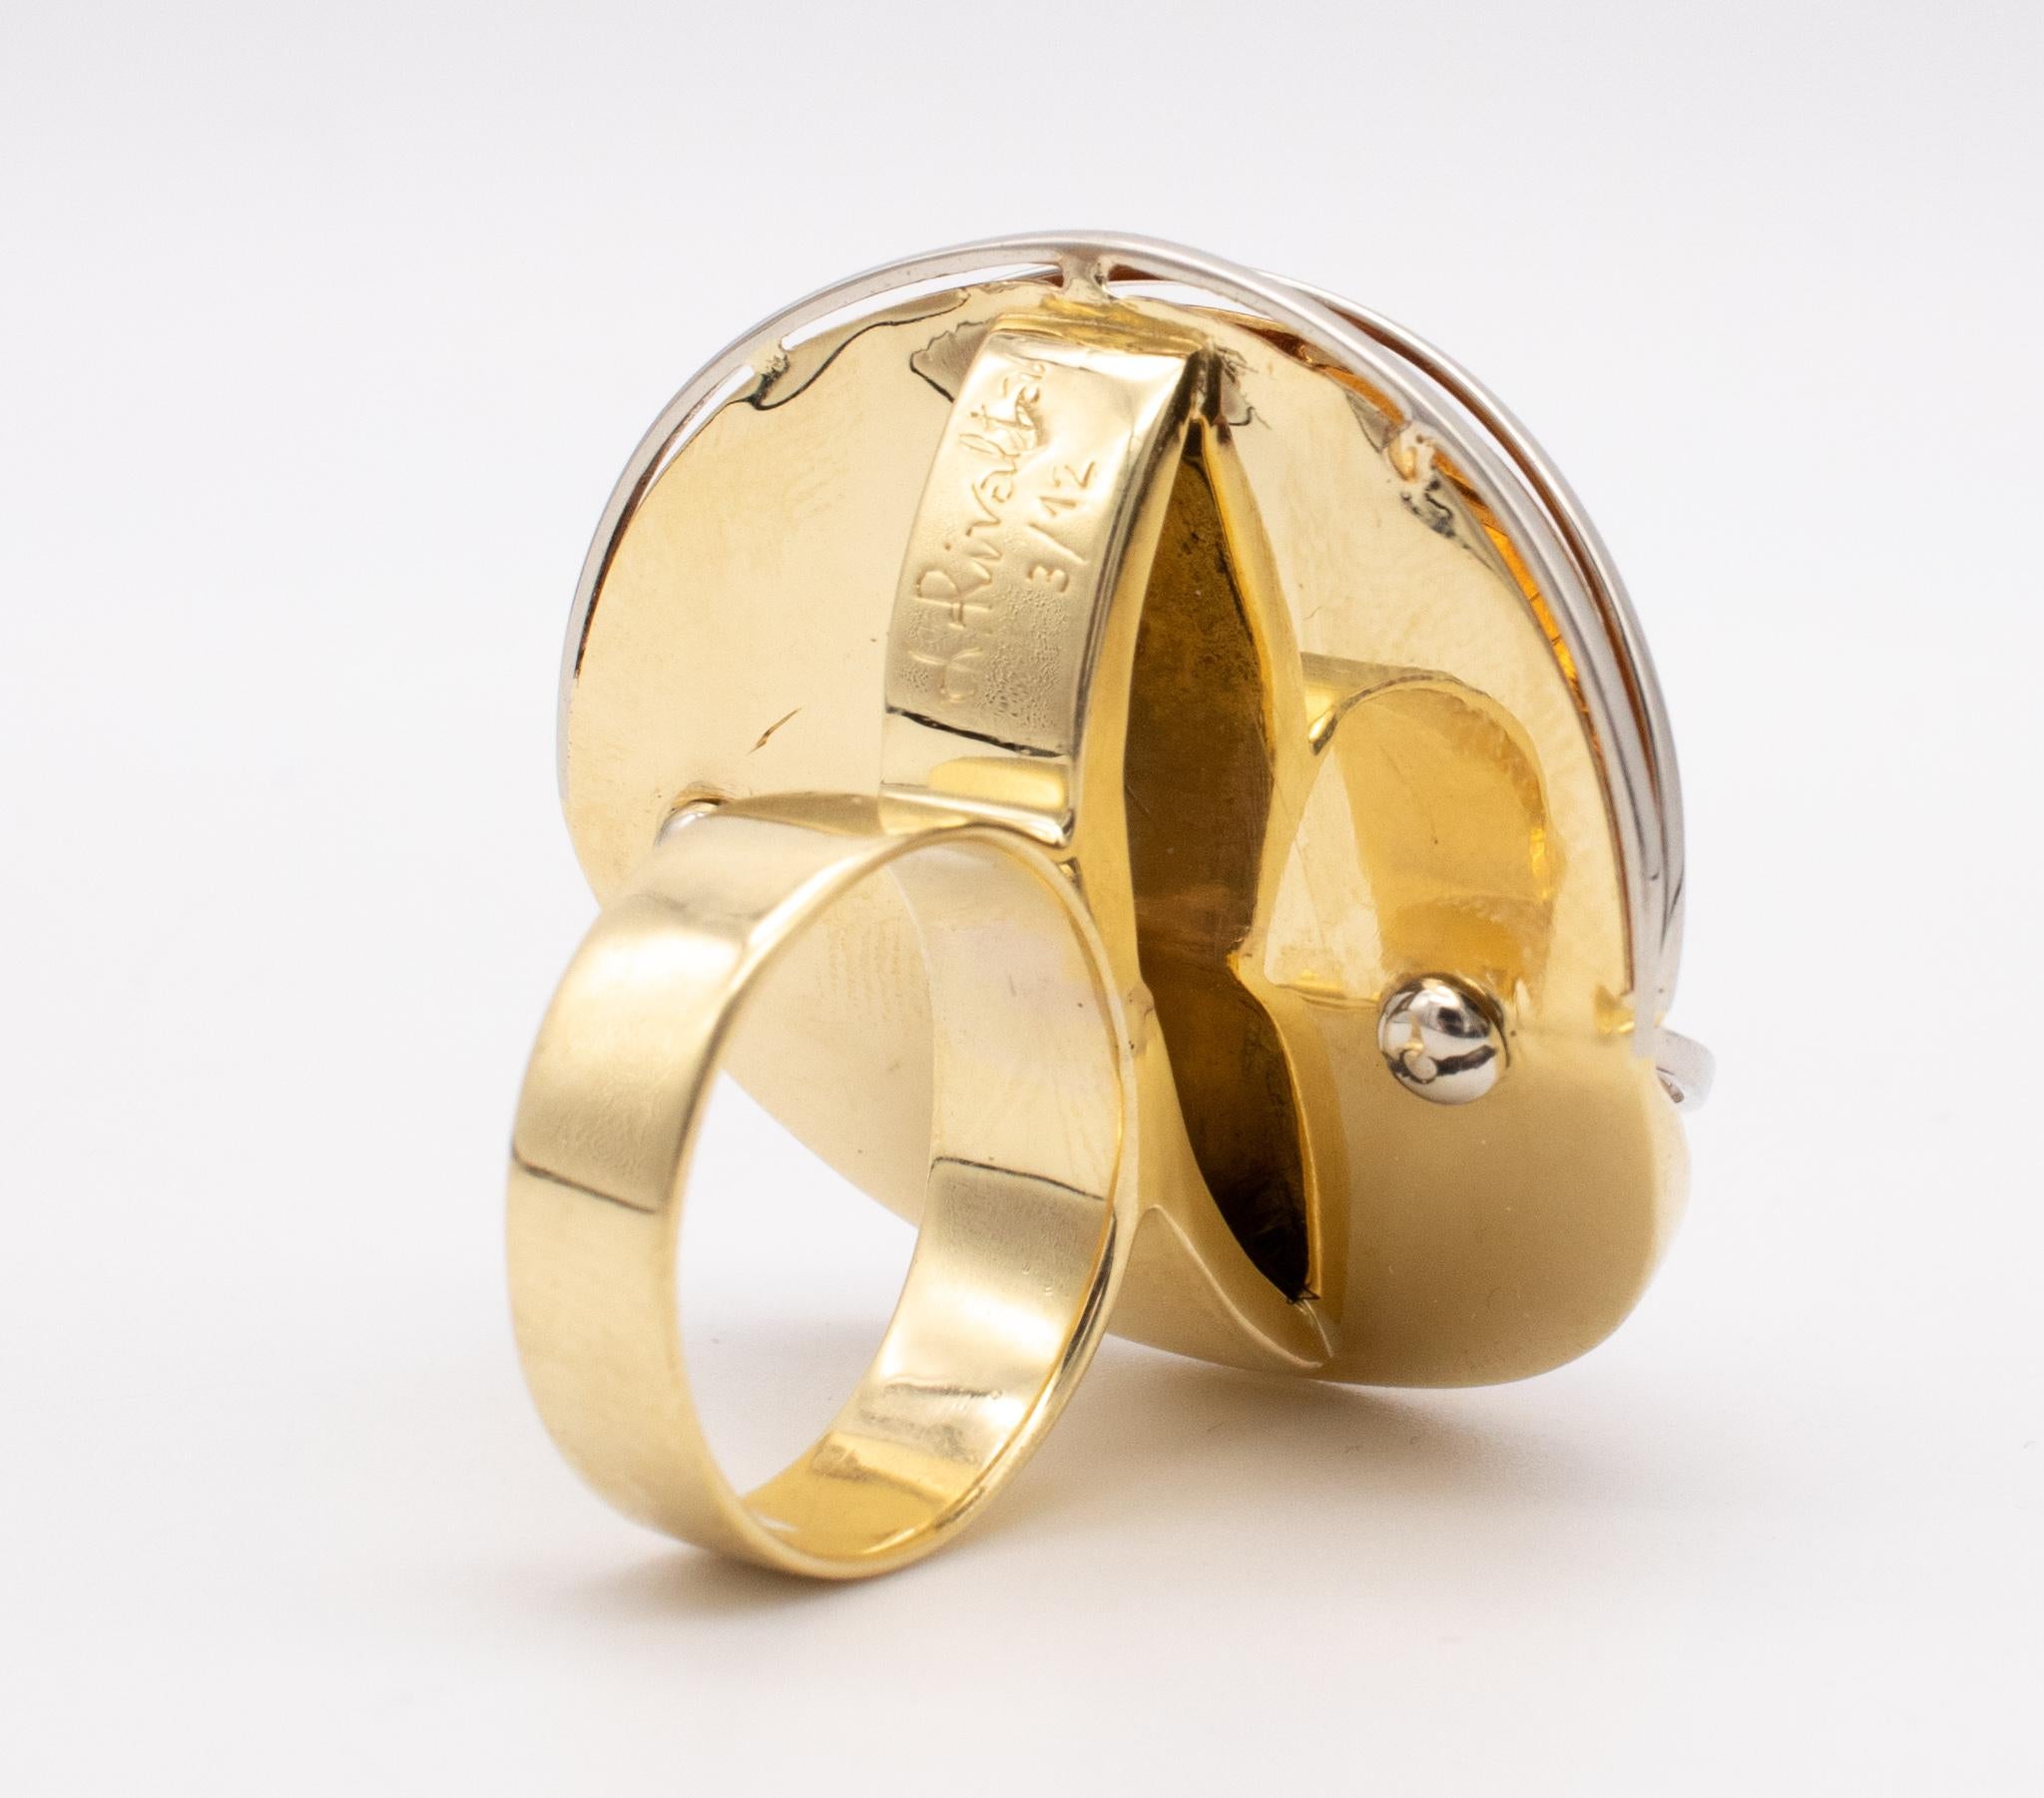 Women's Laura Rivalta 1977 Italy Geometric Sculptural OP Art Ring 18Kt Gold With Coral For Sale